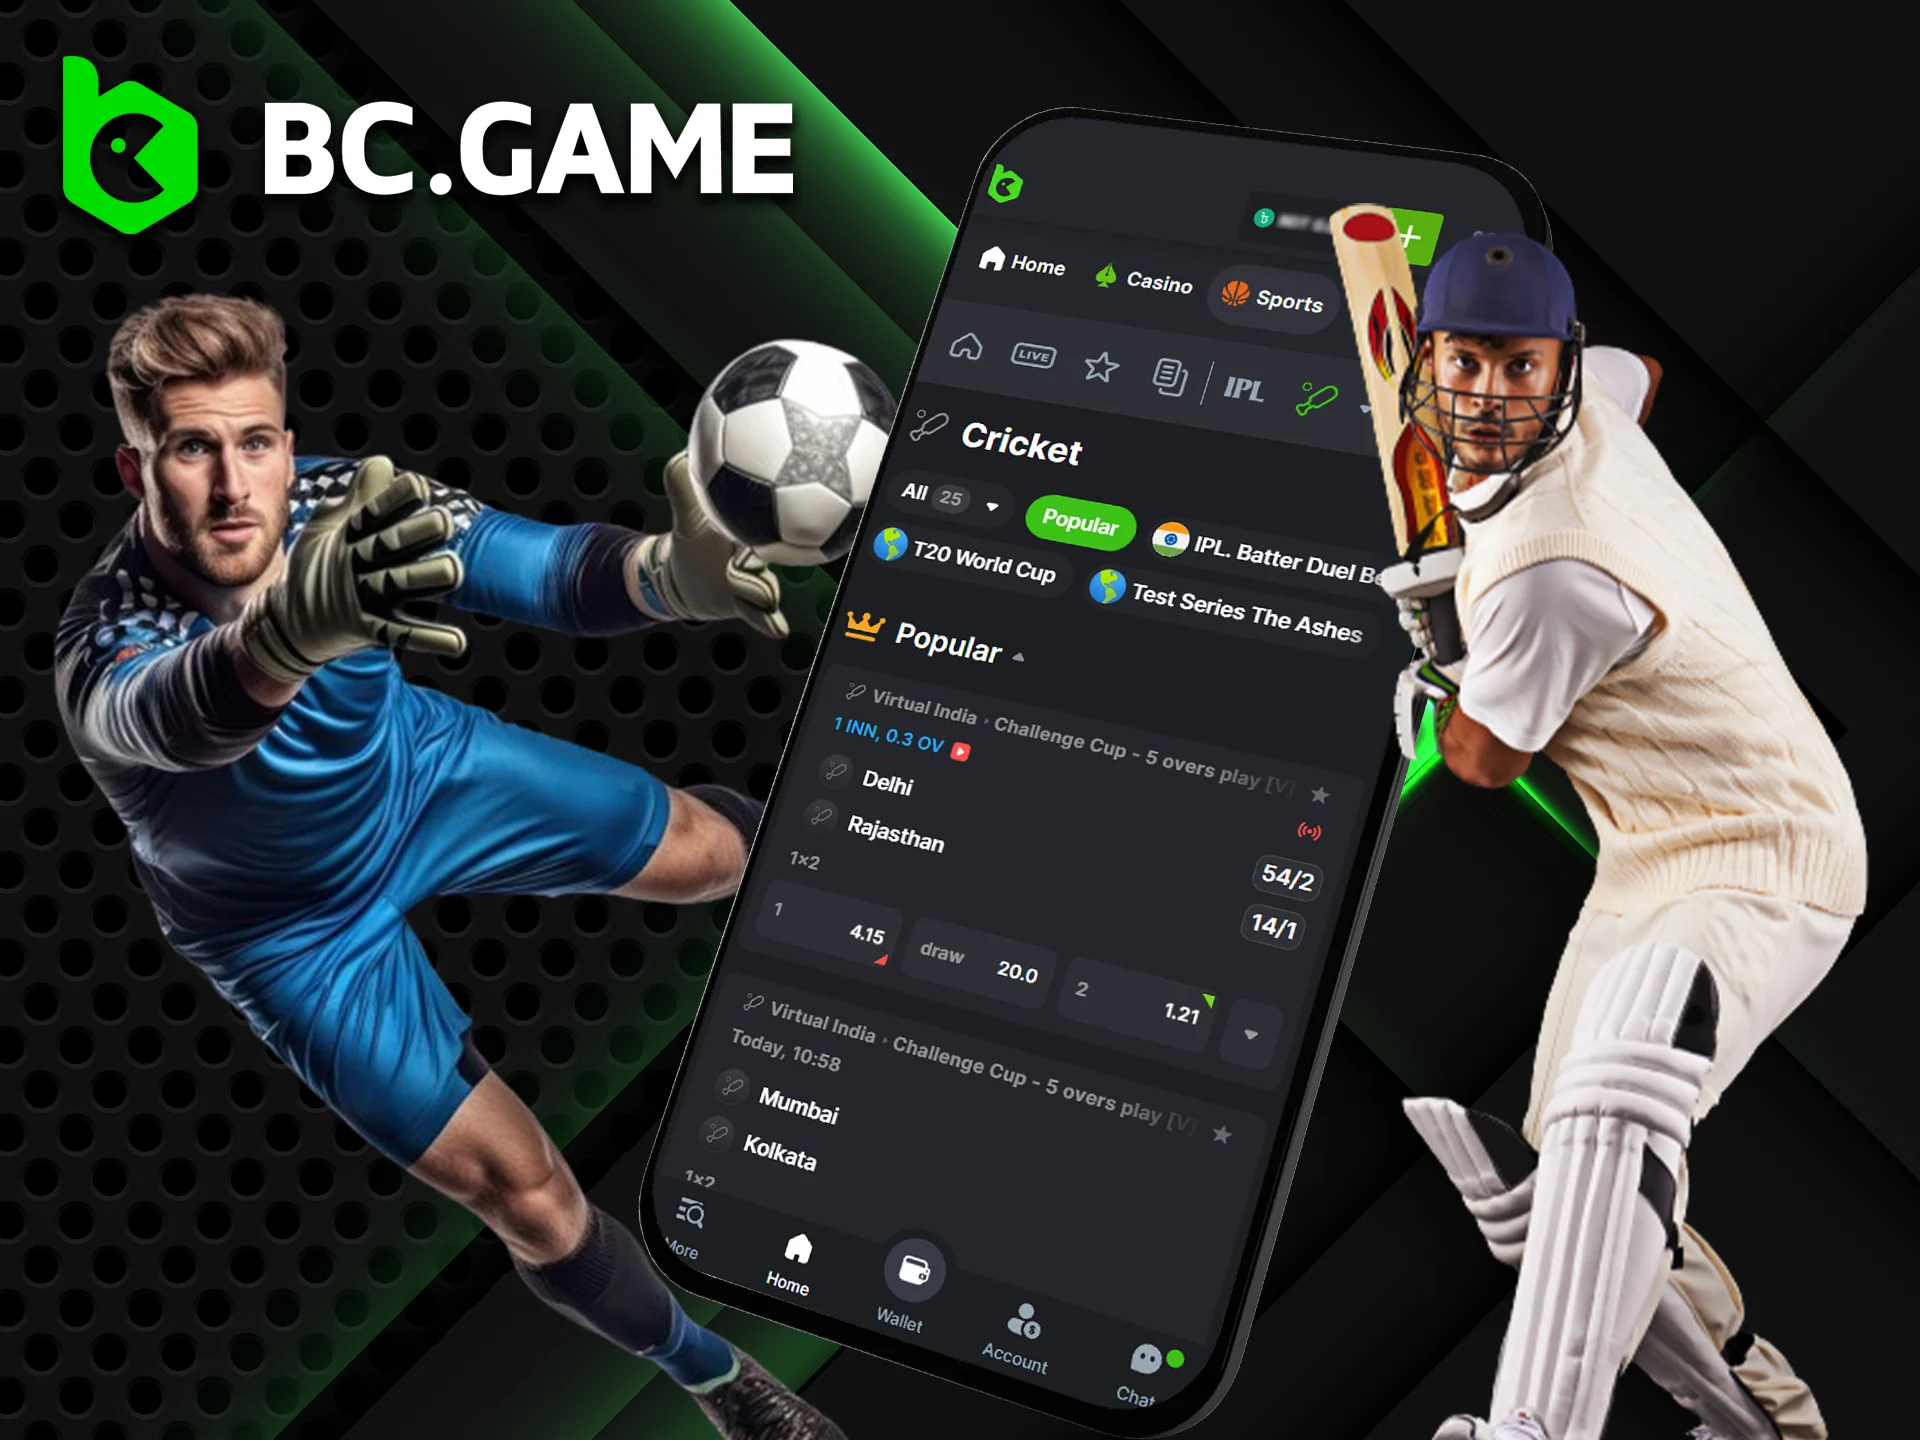 BC GAME App offers betting on a multitude of sports.